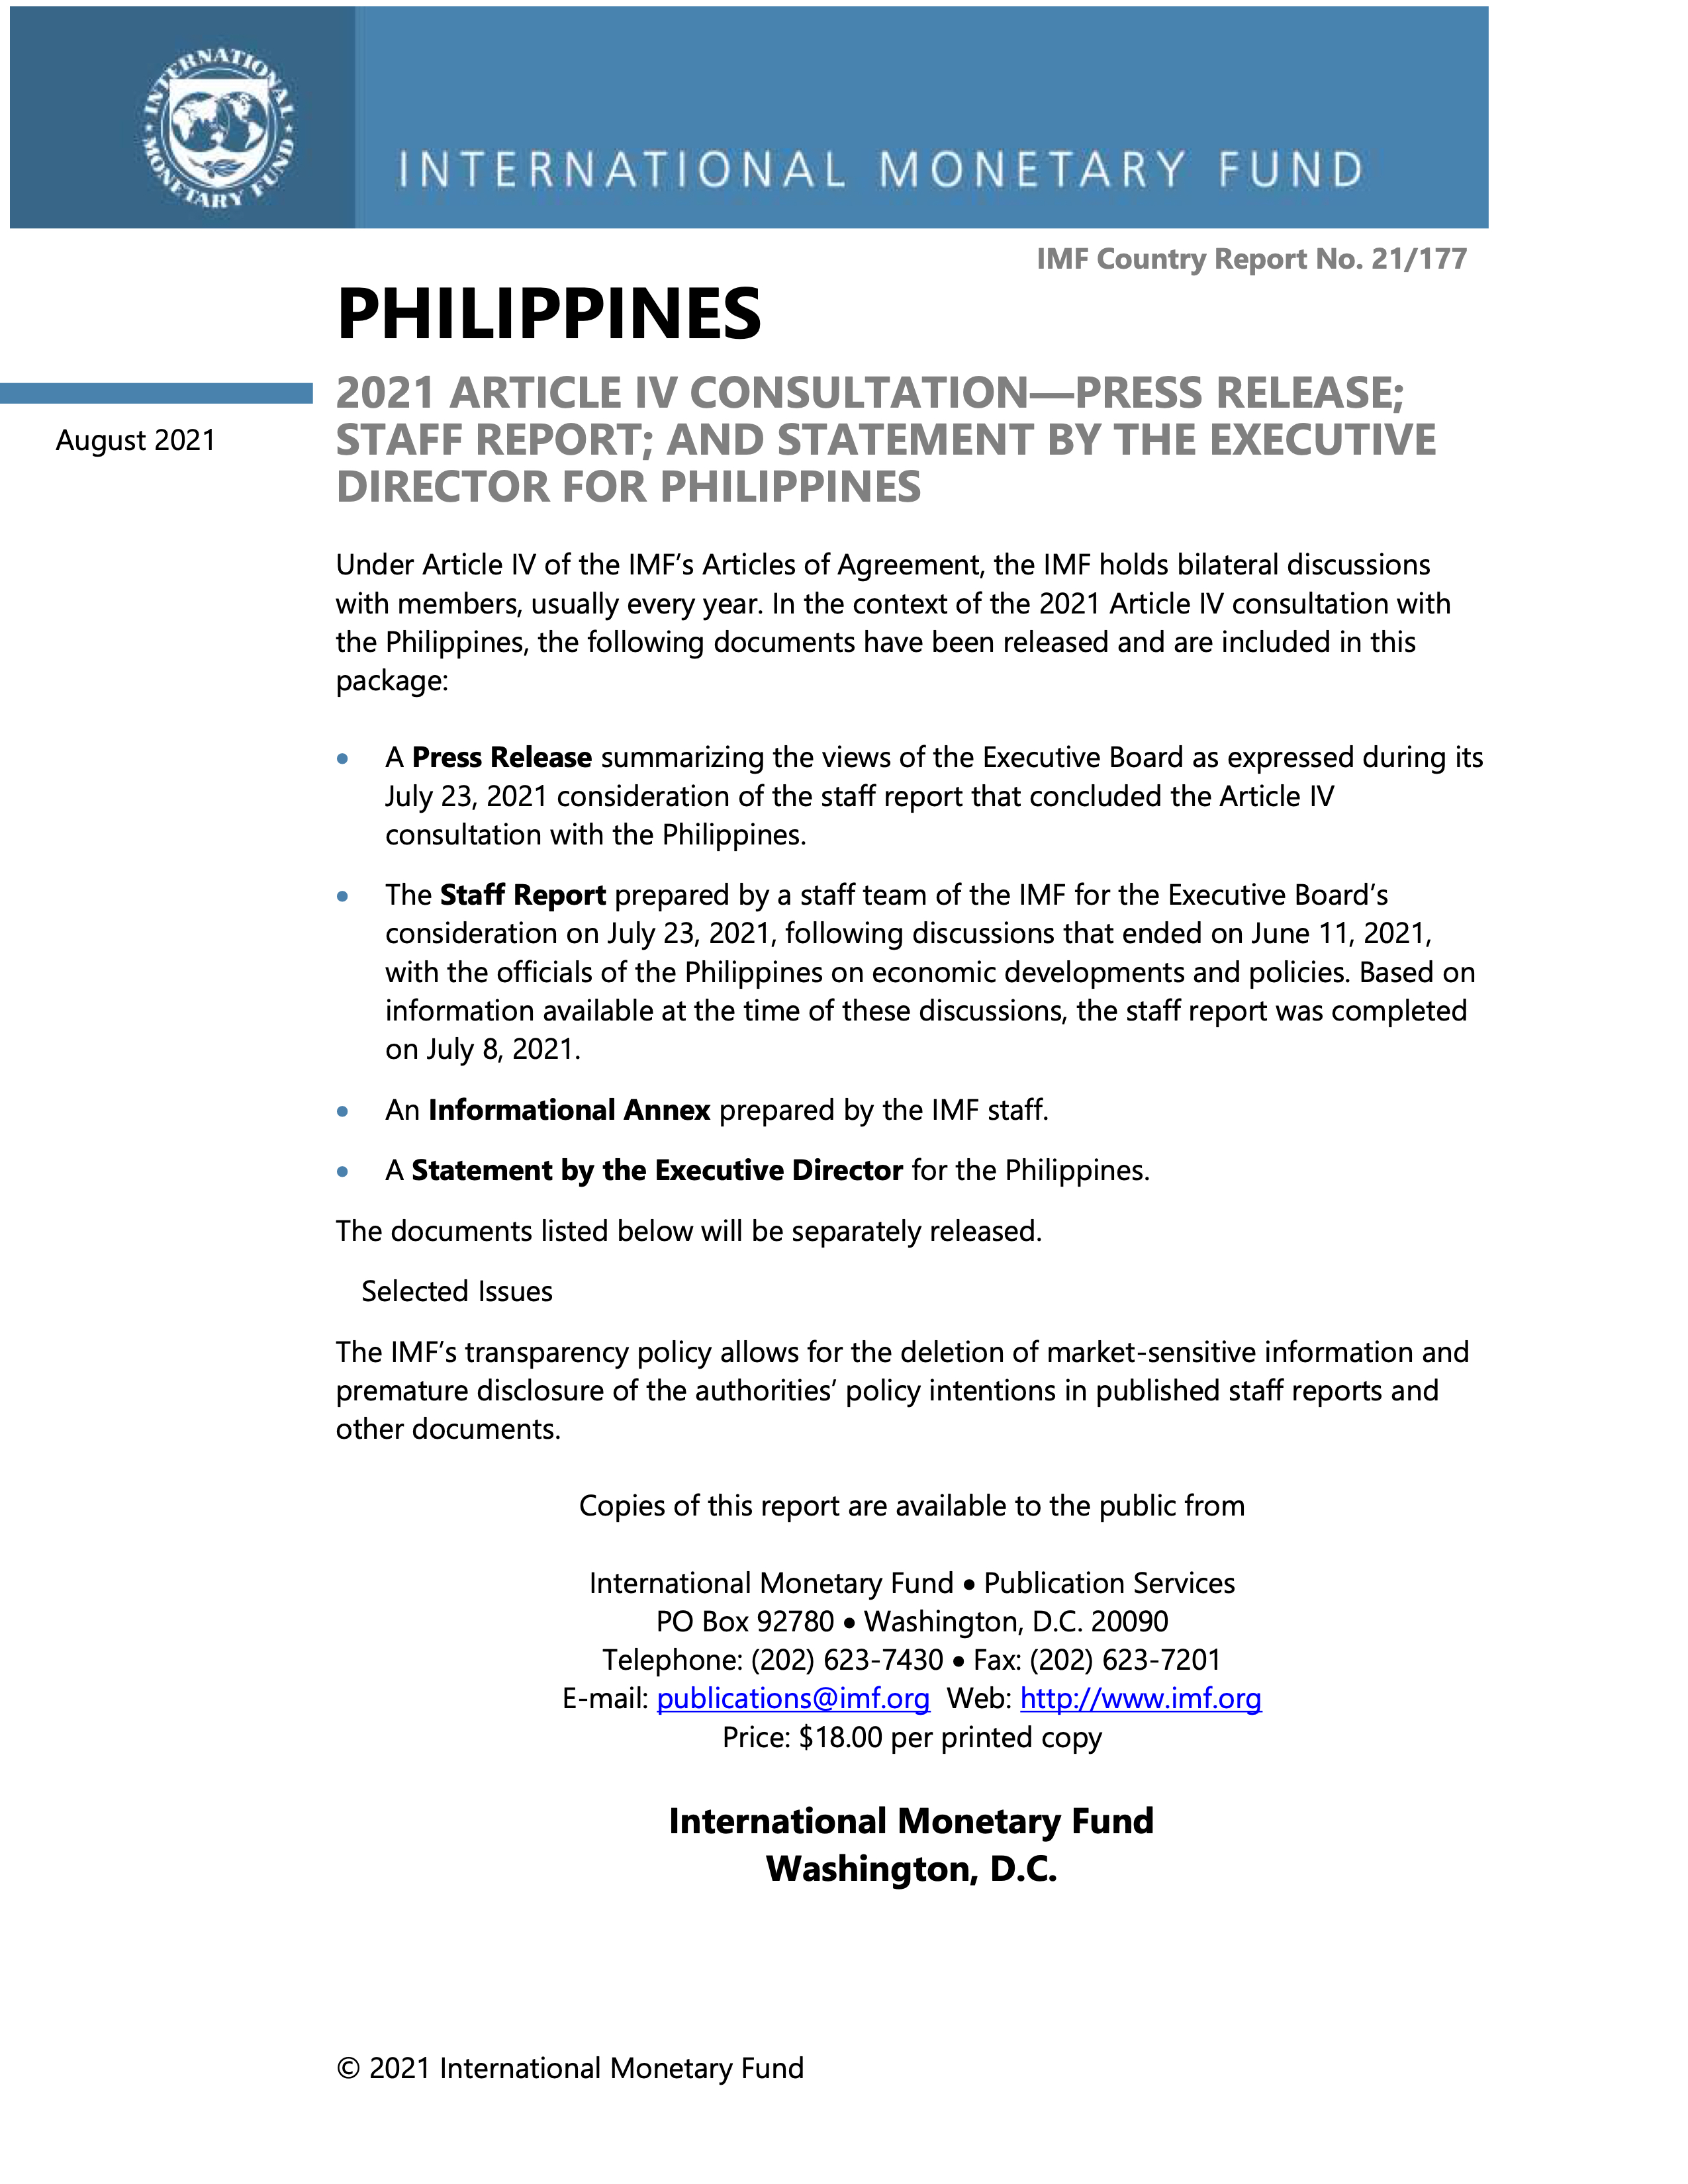 2021 Article IV consultation – press release; Staff report; and Statement by executive director for Philippines